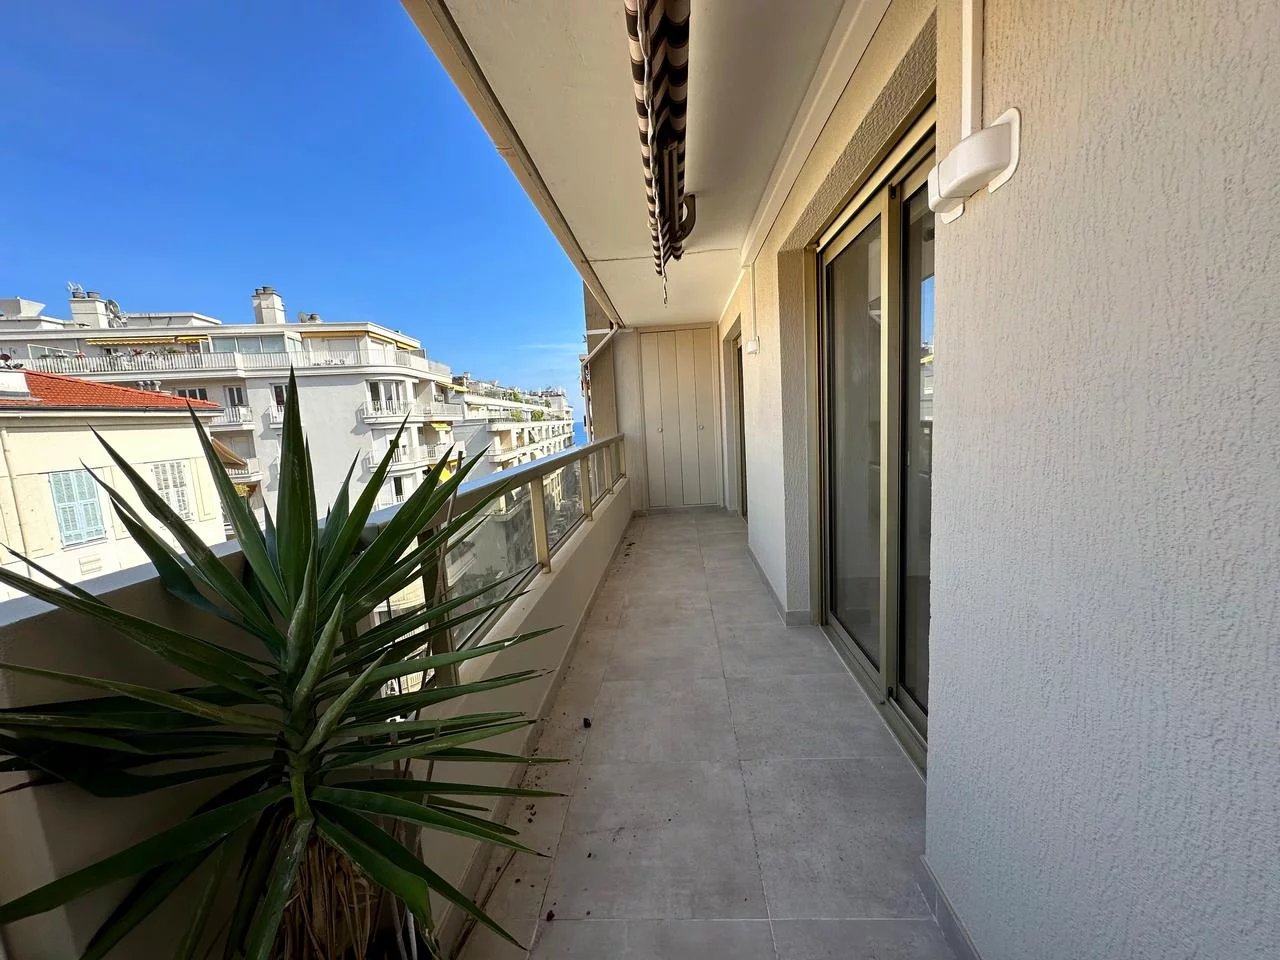 Appartement  3 Rooms 62.05m2  for sale   590 000 €